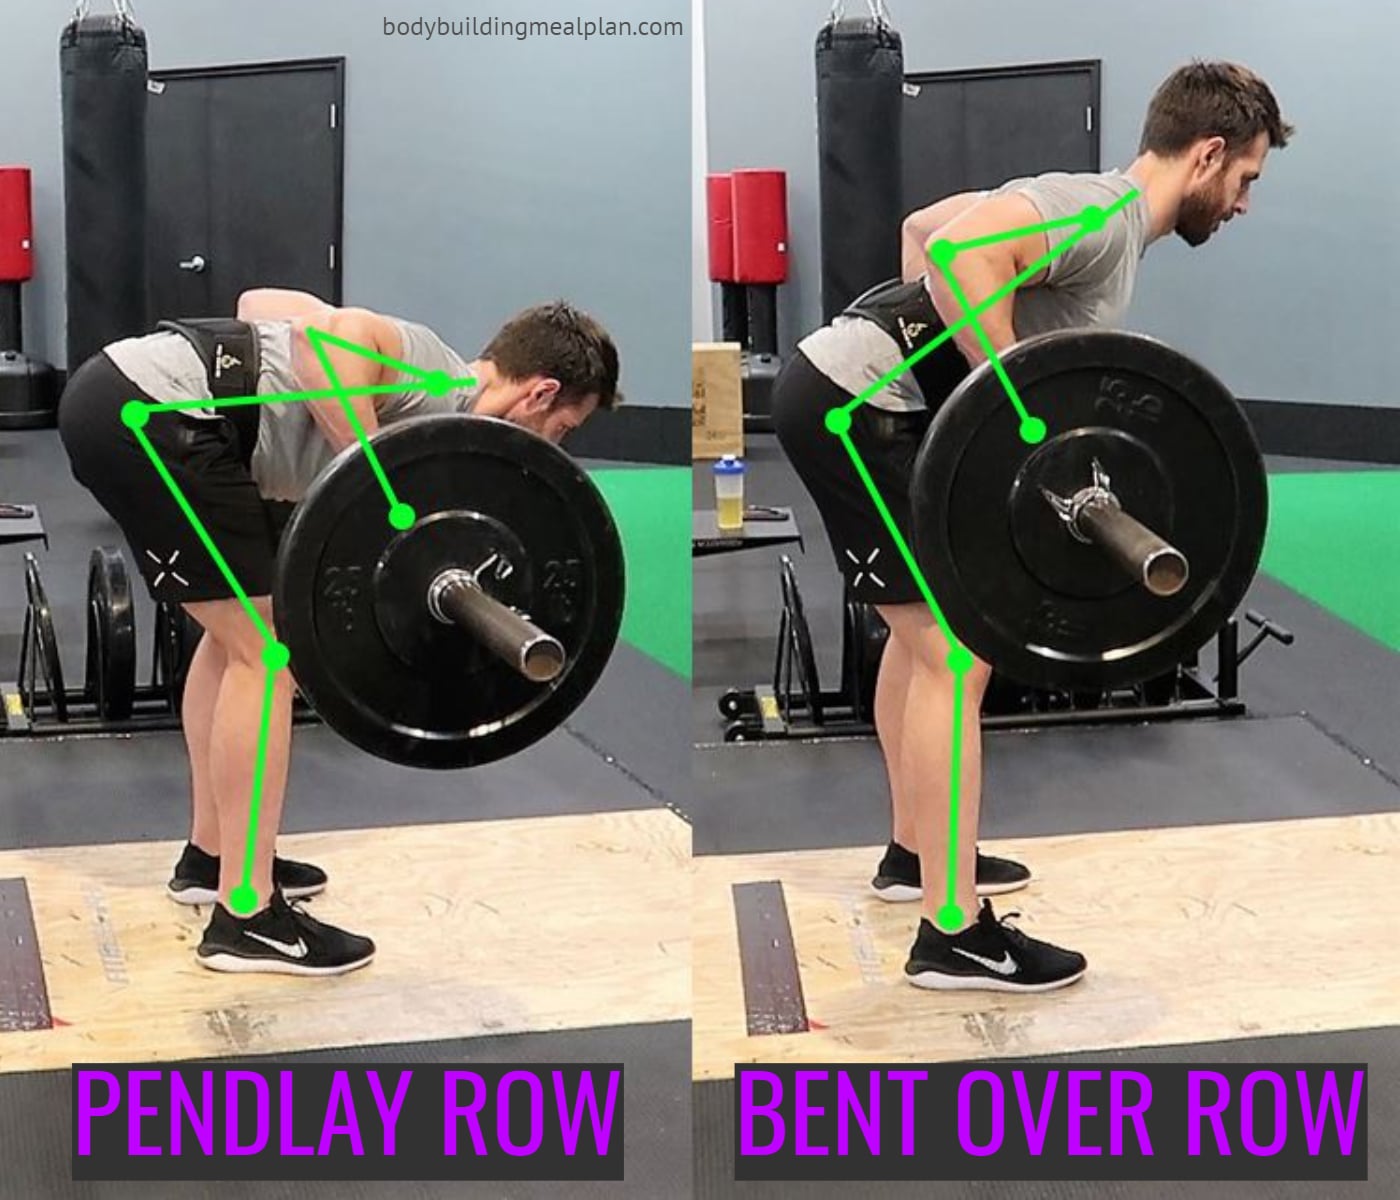 liberal Advanced Murmuring Pendlay Row vs Bent Over Barbell Row For Building A Broader Back |  Nutritioneering